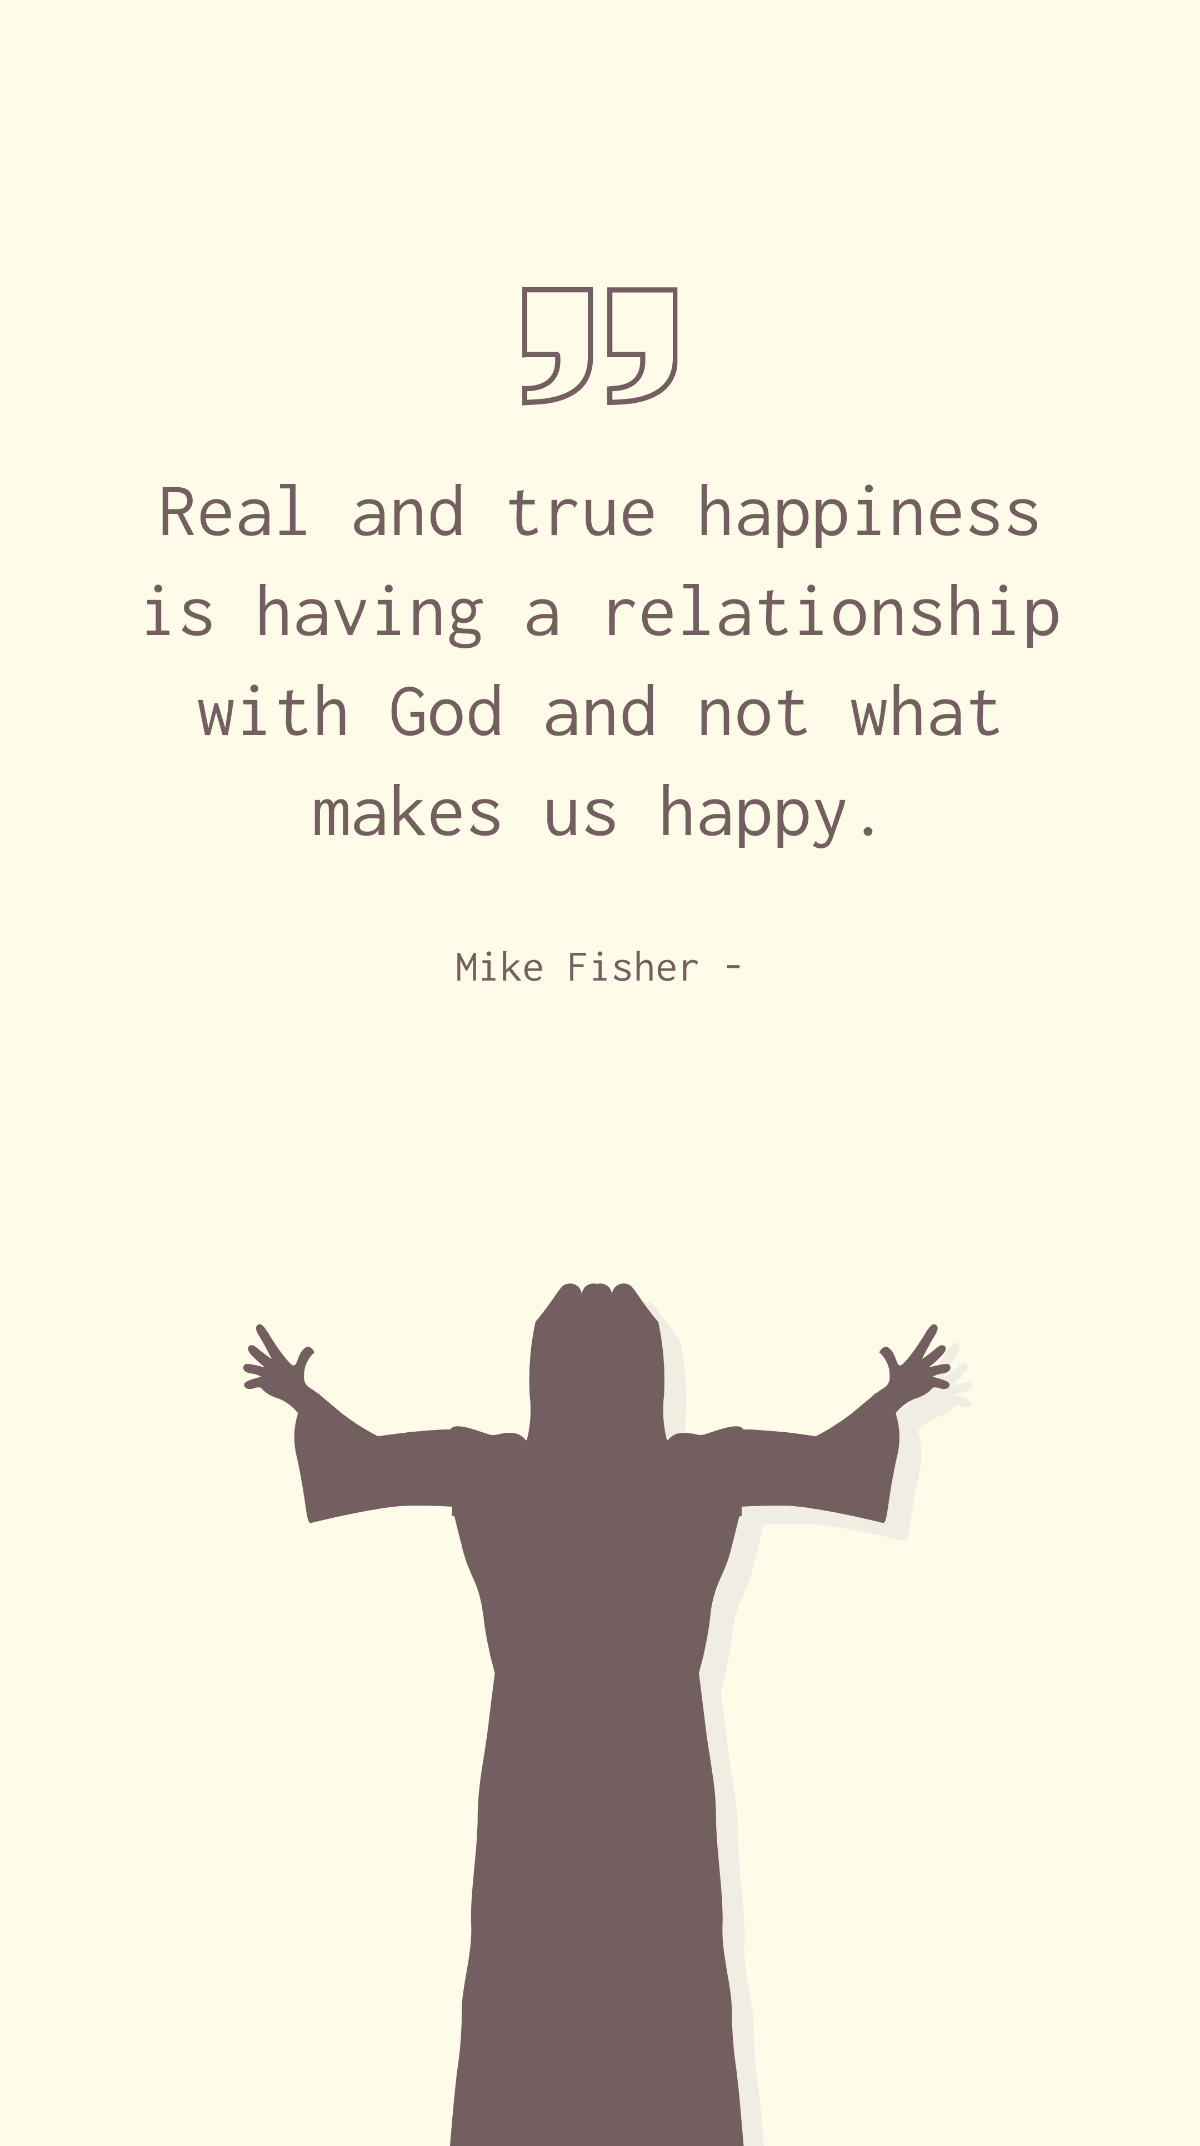 Mike Fisher - Real and true happiness is having a relationship with God and not what makes us happy. Template